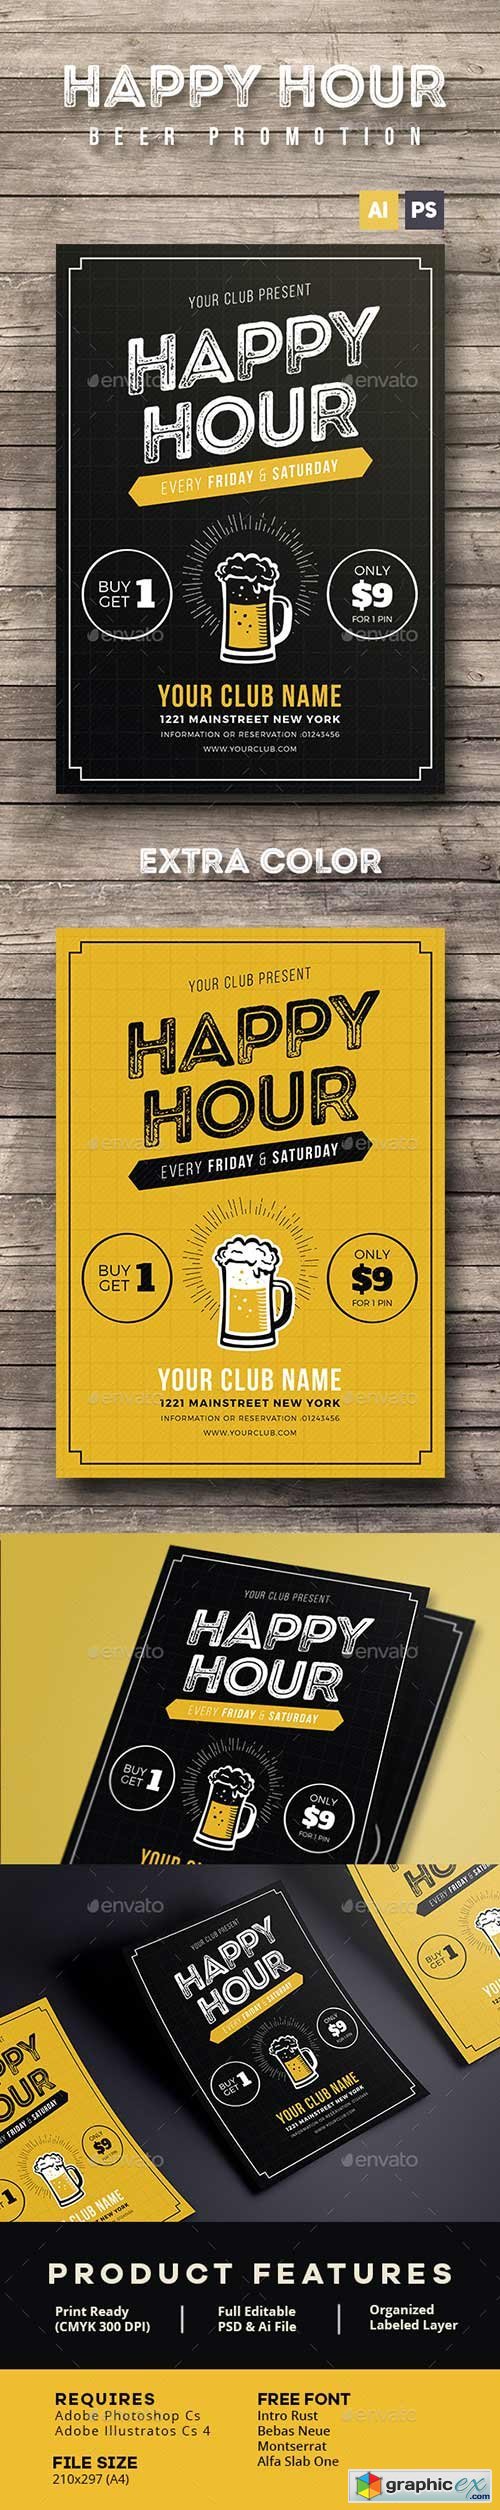 Happy Hour Beer Promotion Flyer / Poster